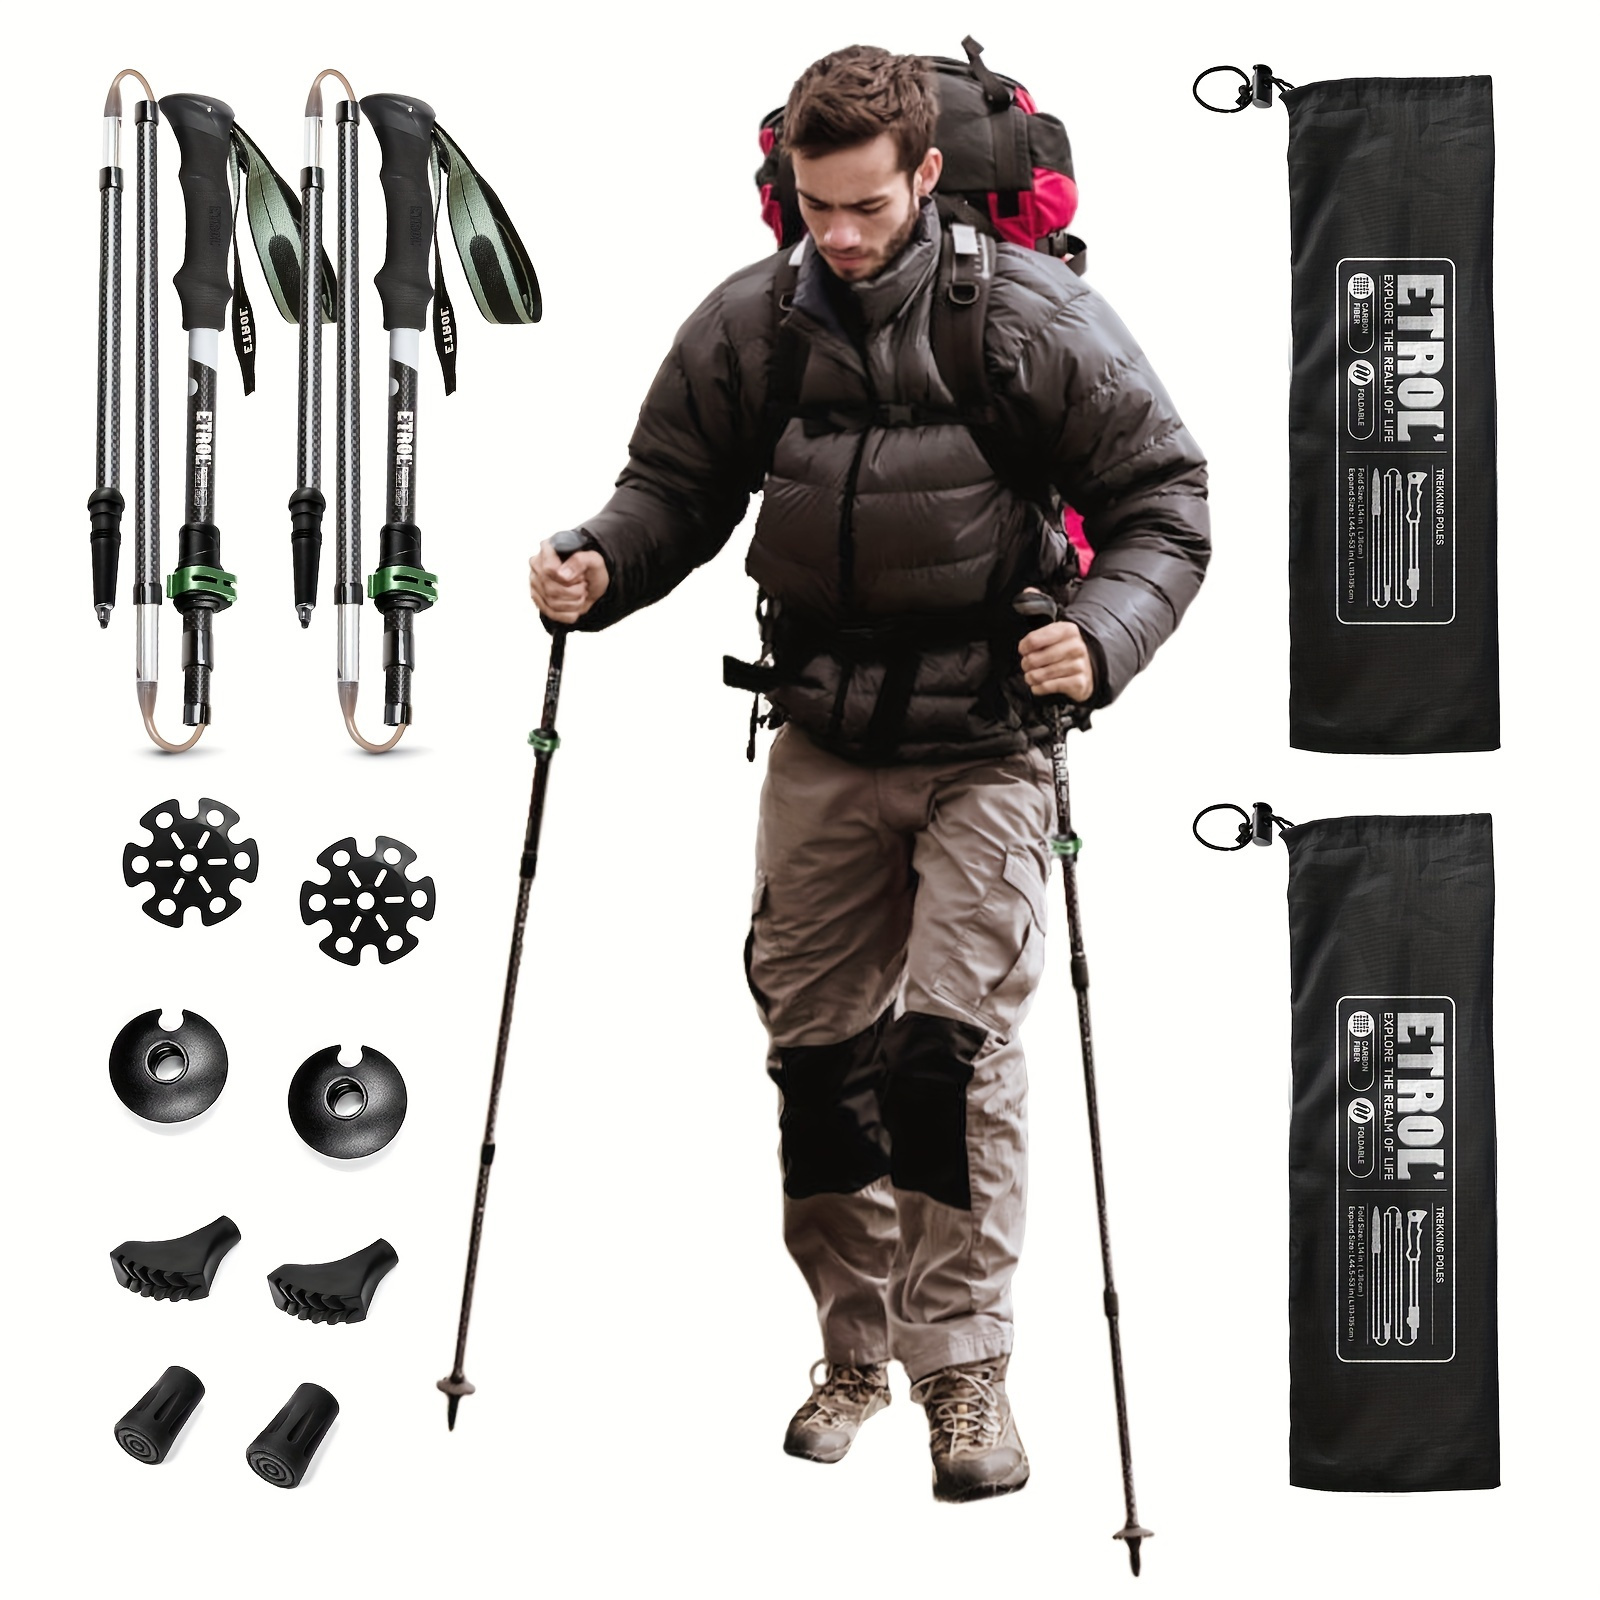 BASTON RETRACTIL - hiking outdoor Chile